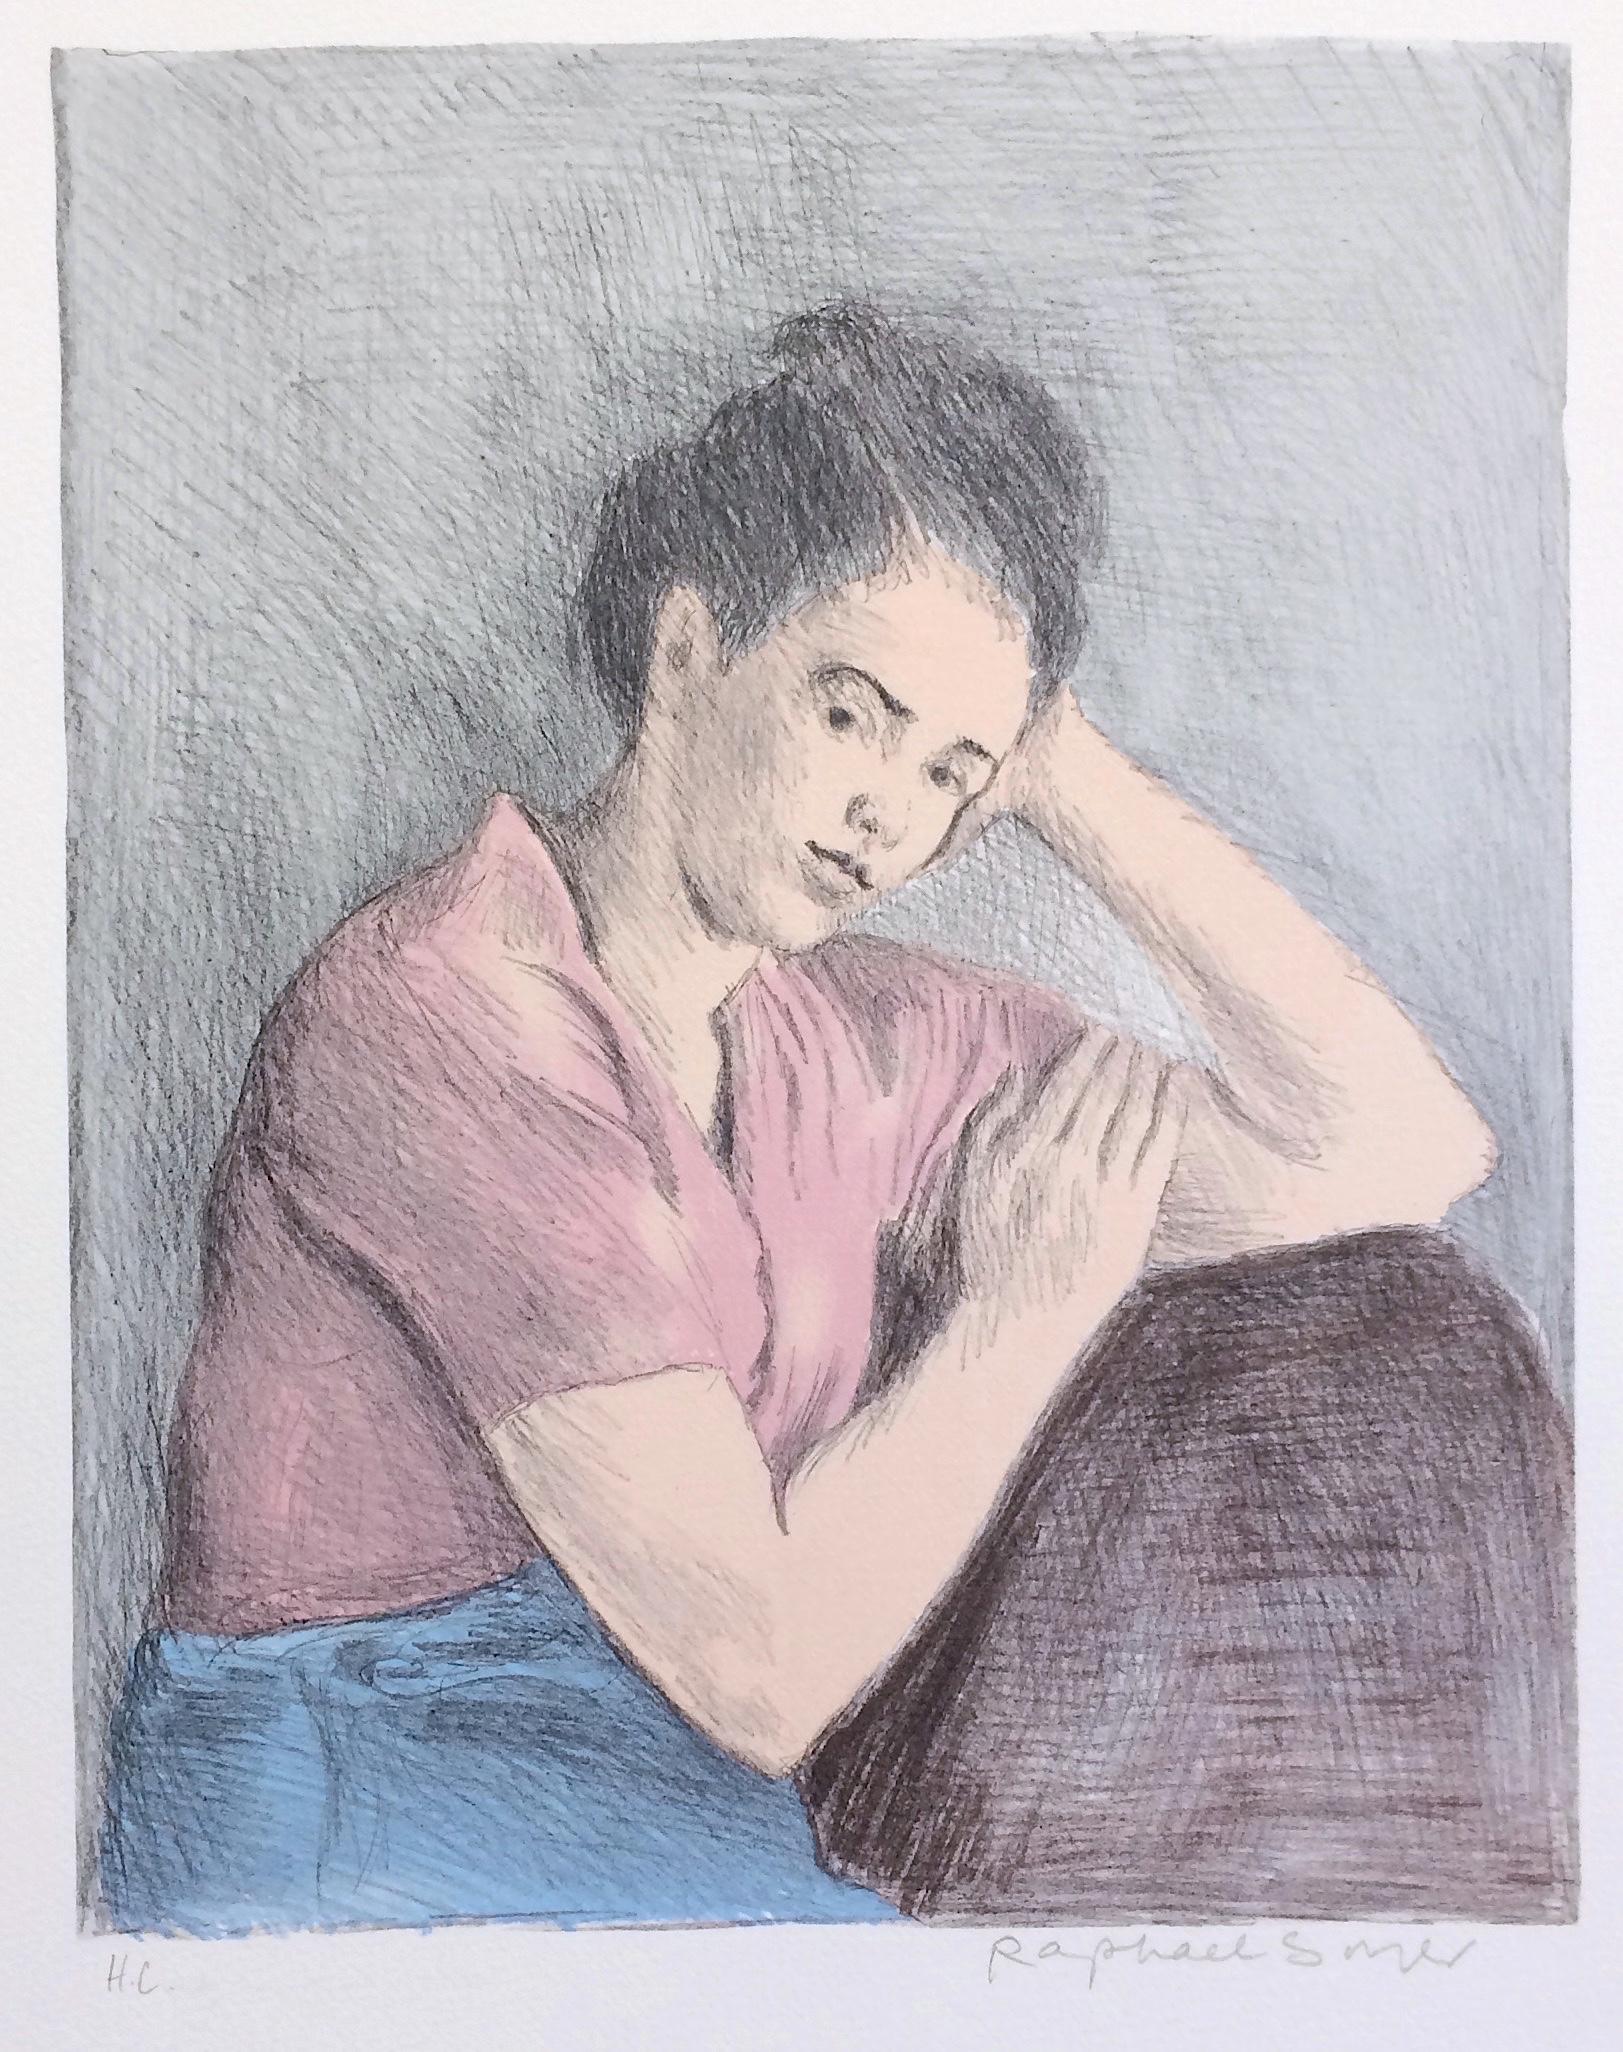 YOUNG WOMAN PINK BLOUSE Signed Lithograph, Portrait Drawing, Social Realism - Print by Raphael Soyer